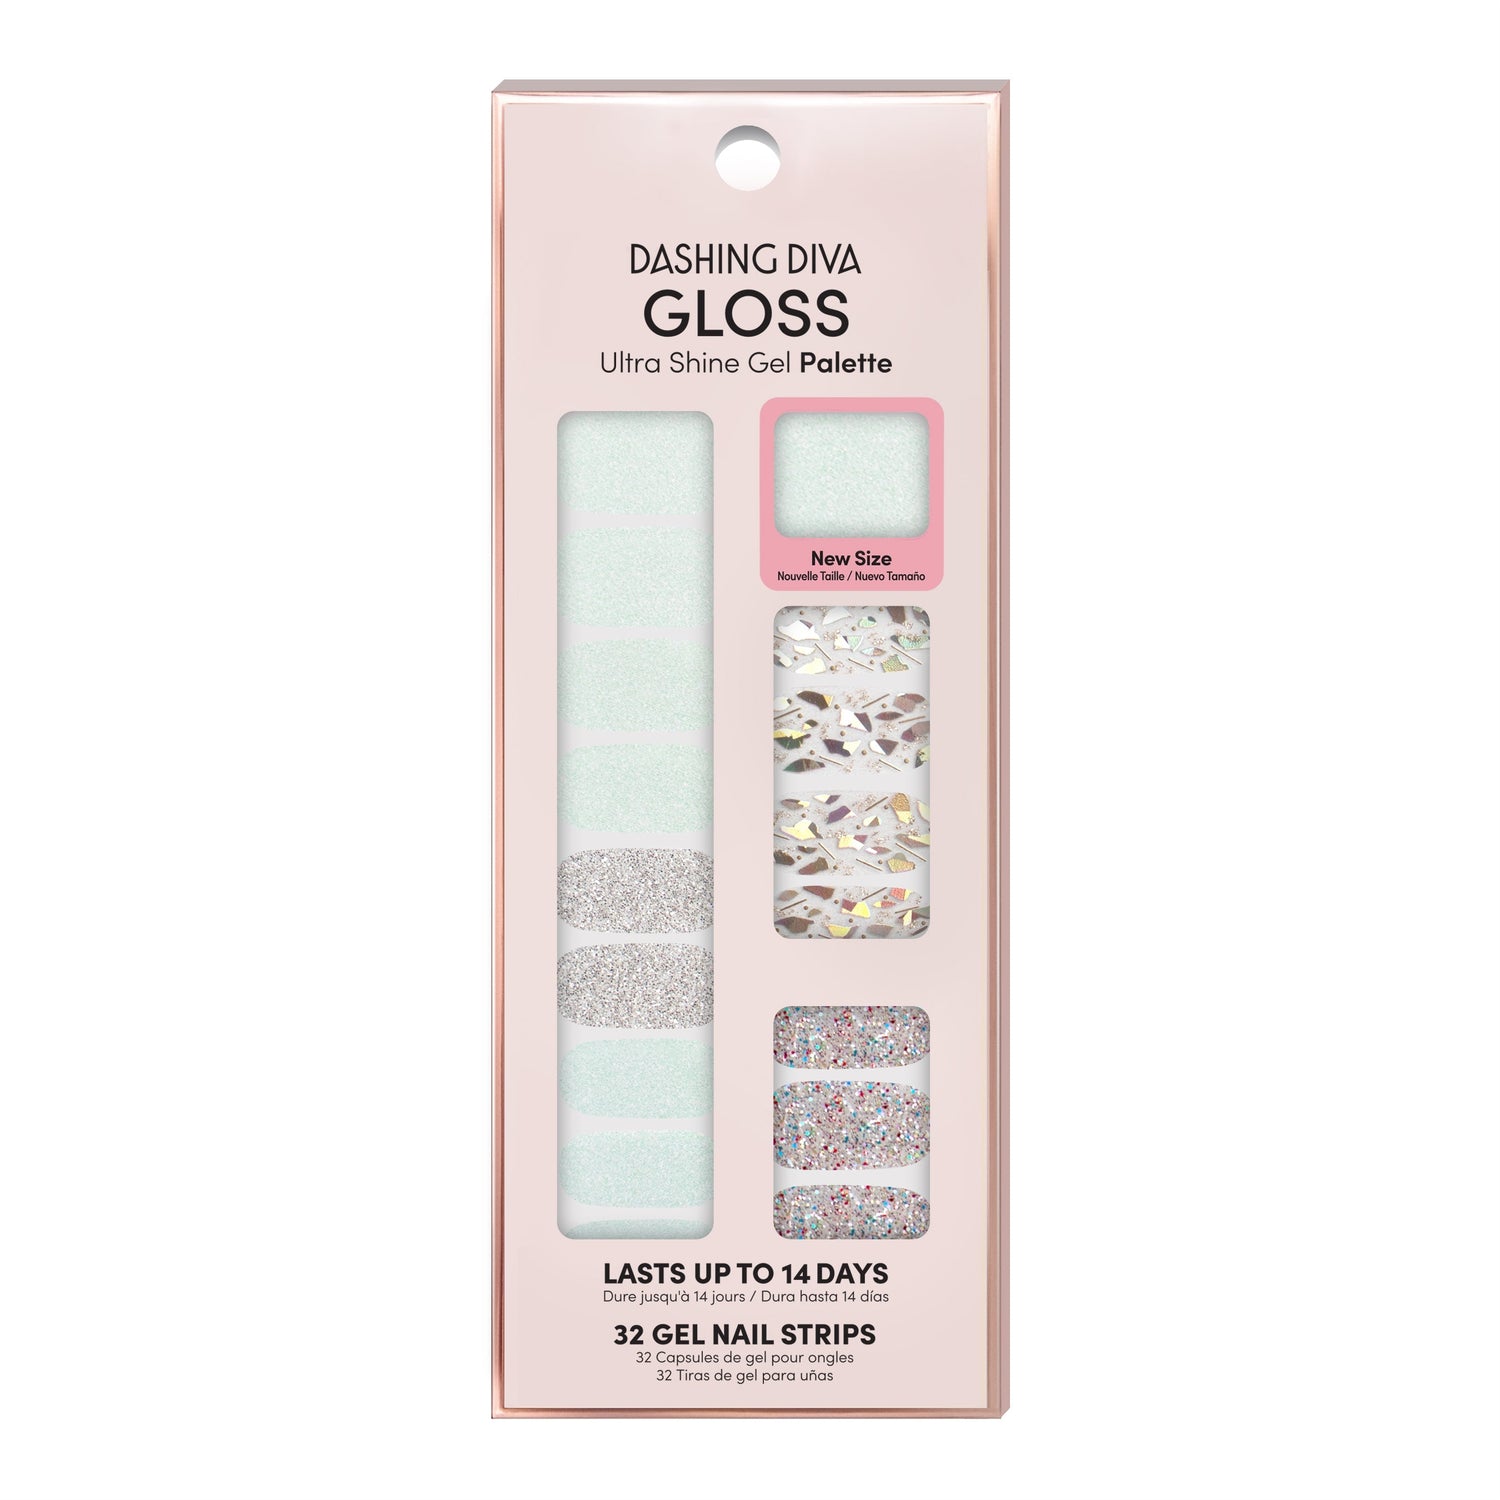 Dashing Diva GLOSS opal gel nail strips with silver glitter and shattered glass accents.